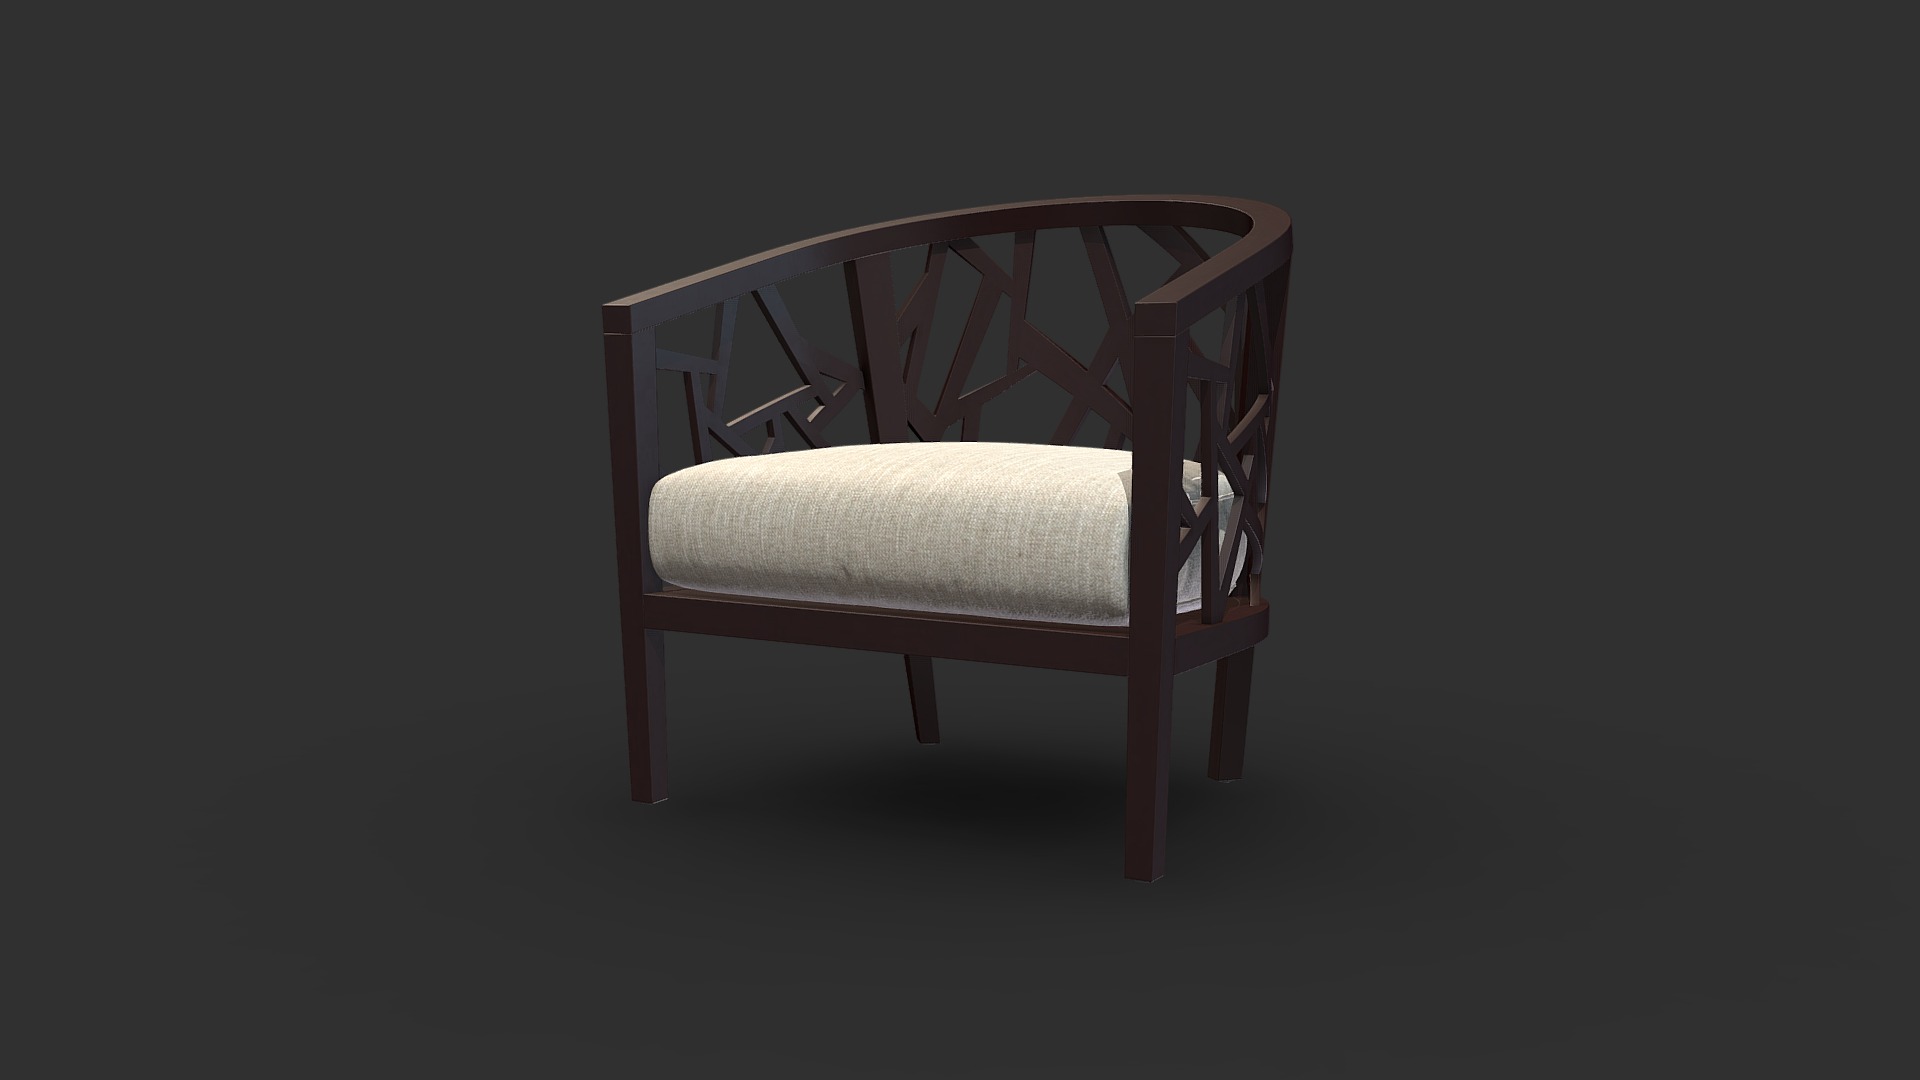 3D model Ankara Truffle Frame Chair - This is a 3D model of the Ankara Truffle Frame Chair. The 3D model is about a chair with a cushion.